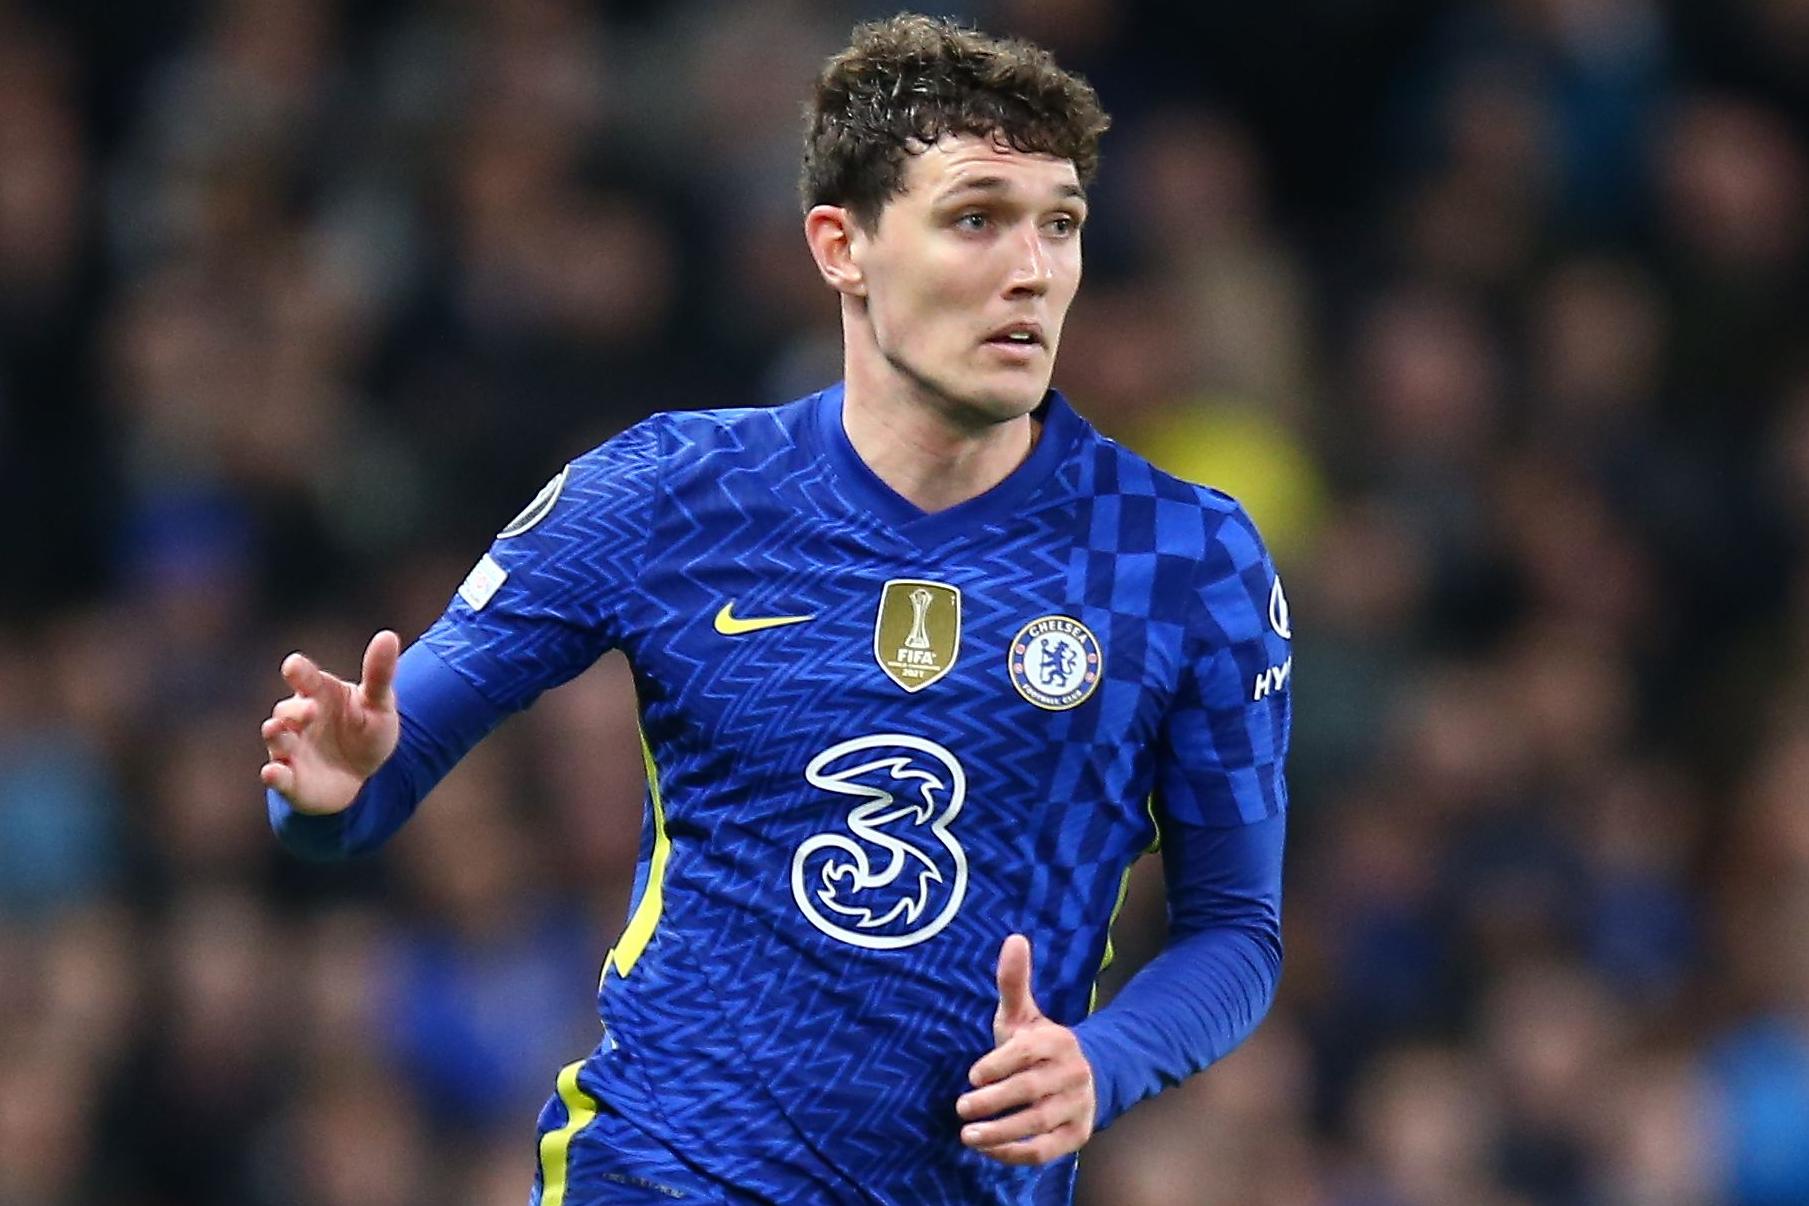 UEFA Champions League Quarterfinal: “We have to fix it,” says Chelsea defender Andreas Christensen after a 3-1 defeat to Real Madrid